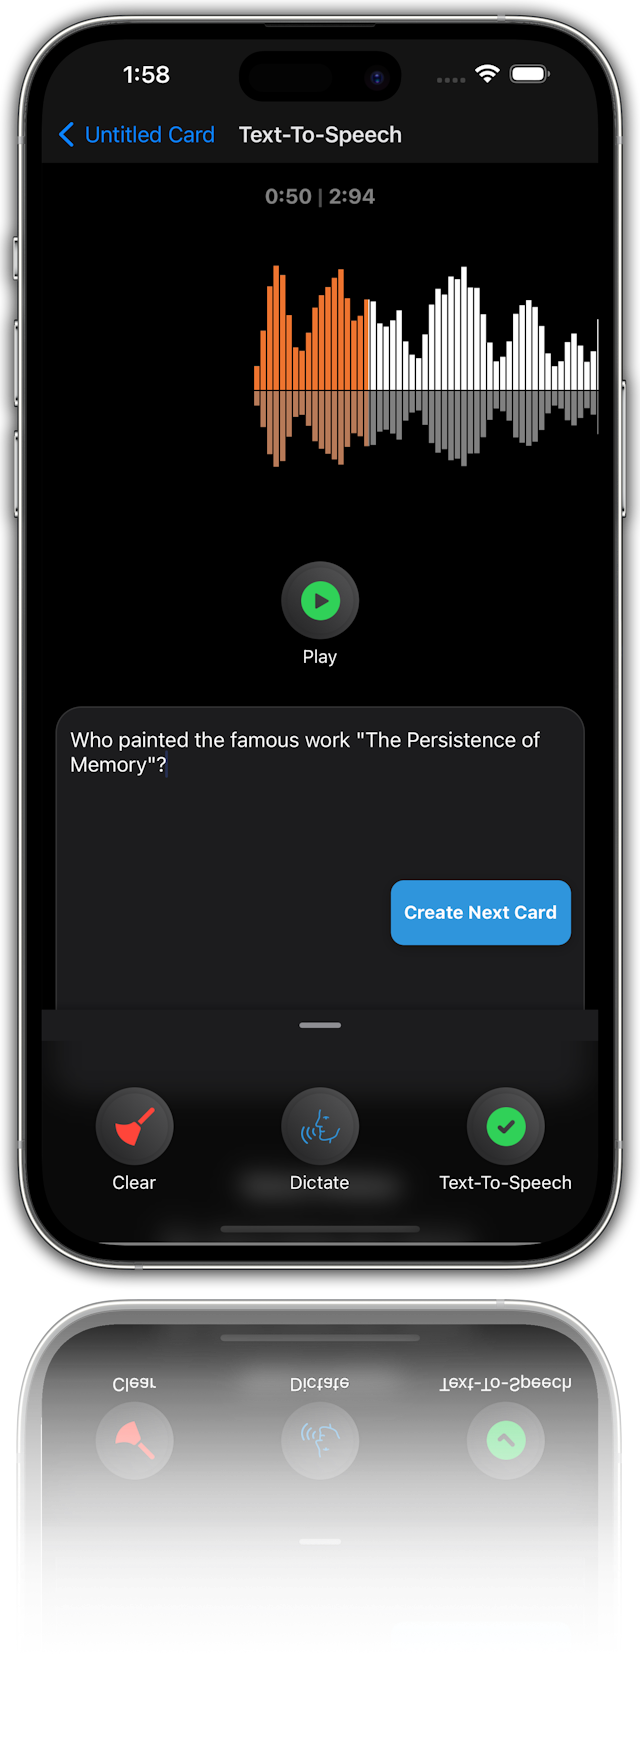 This is a photo realistic image of an iPhone with a text-to-speech app open. The app is called “Untitled Card” and is in dark mode. The app has a waveform visualizer at the top and a question below it. The question reads “Who painted the famous work “The Persistence of Memory”?” The app has a “Play” button, a “Create Next Card” button, and a “Clear” button. The app also has a “Dictate” button and a “Text-To-Speech” button. The background is white and the phone is casting a shadow.